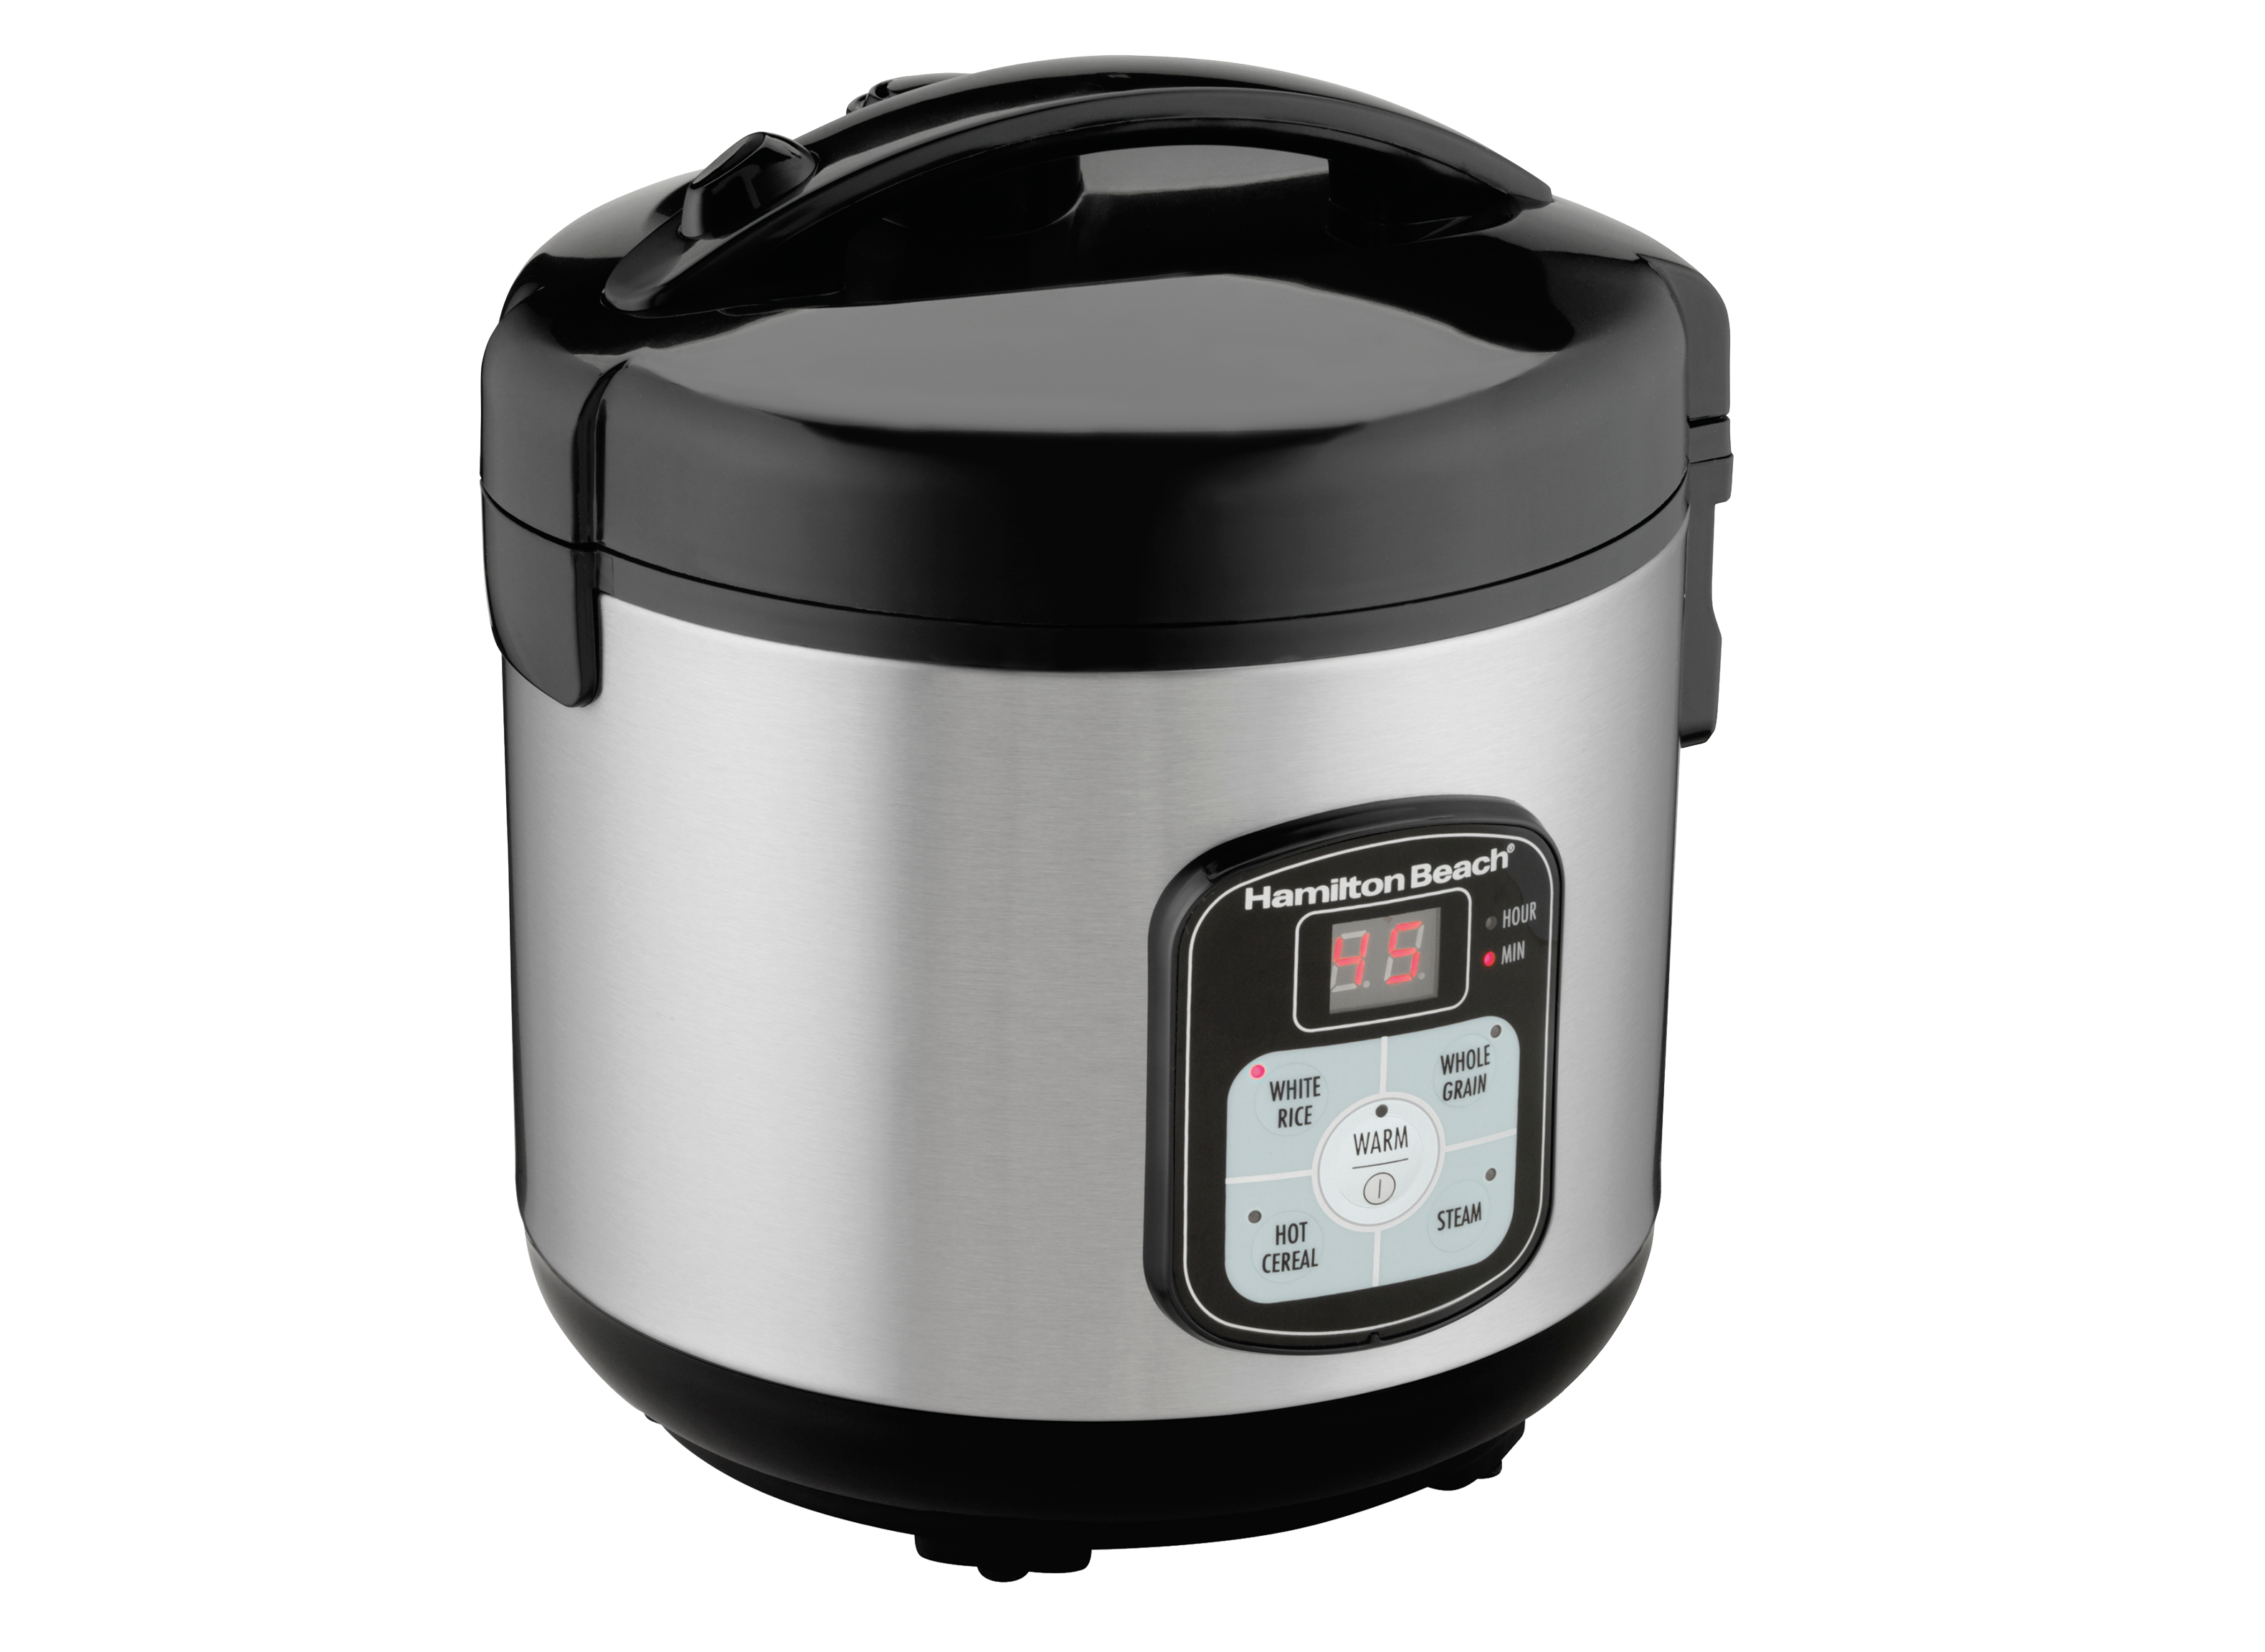 https://crdms.images.consumerreports.org/prod/products/cr/models/401699-rice-cookers-hamilton-beach-cooker-and-steamer-37519-10014279.png